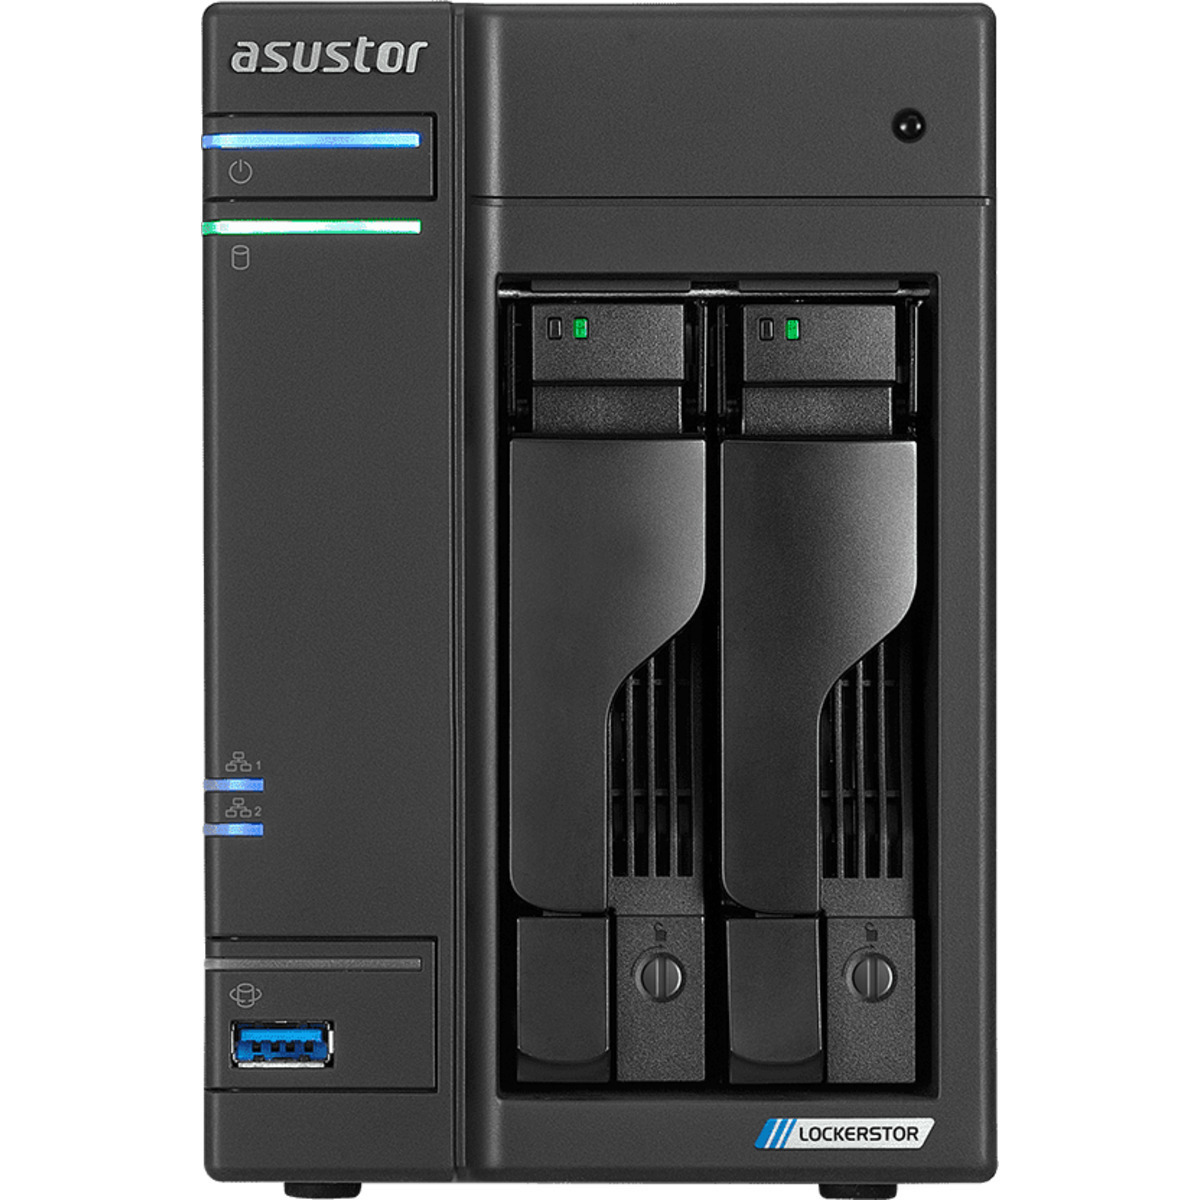 buy $742 ASUSTOR AS6602T Lockerstor 2 6tb Desktop NAS - Network Attached Storage Device 2x3000gb Seagate BarraCuda ST3000DM007 3.5 7200rpm SATA 6Gb/s HDD CONSUMER Class Drives Installed - Burn-In Tested - FREE RAM UPGRADE - nas headquarters buy network attached storage server device das new raid-5 free shipping usa AS6602T Lockerstor 2